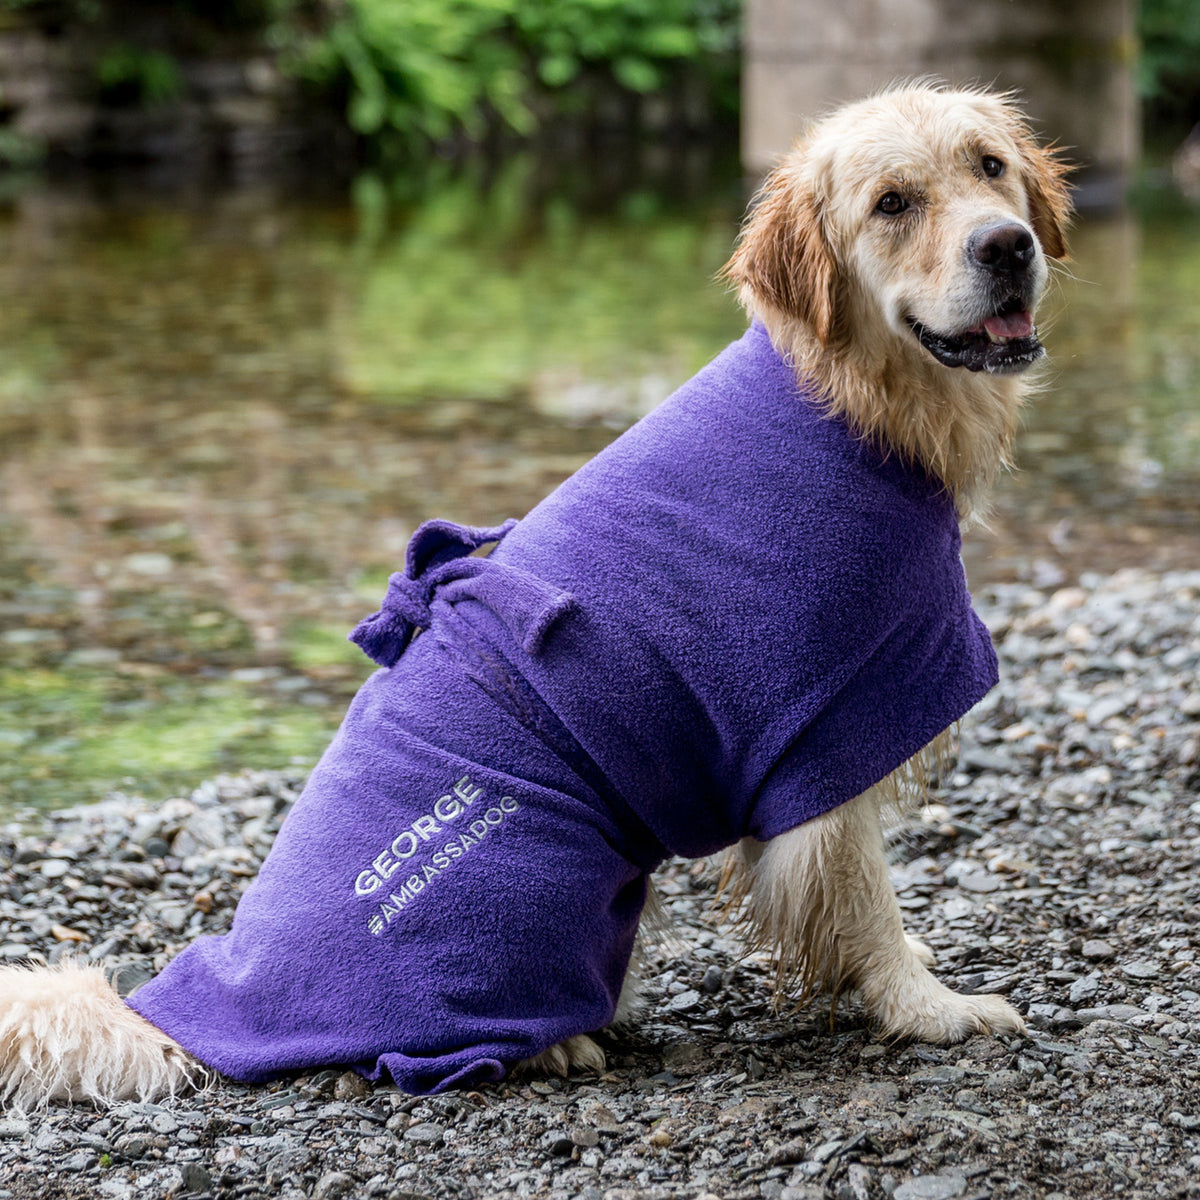 Dog Coat for Outdoors with Harness Access Opening in 9 colours